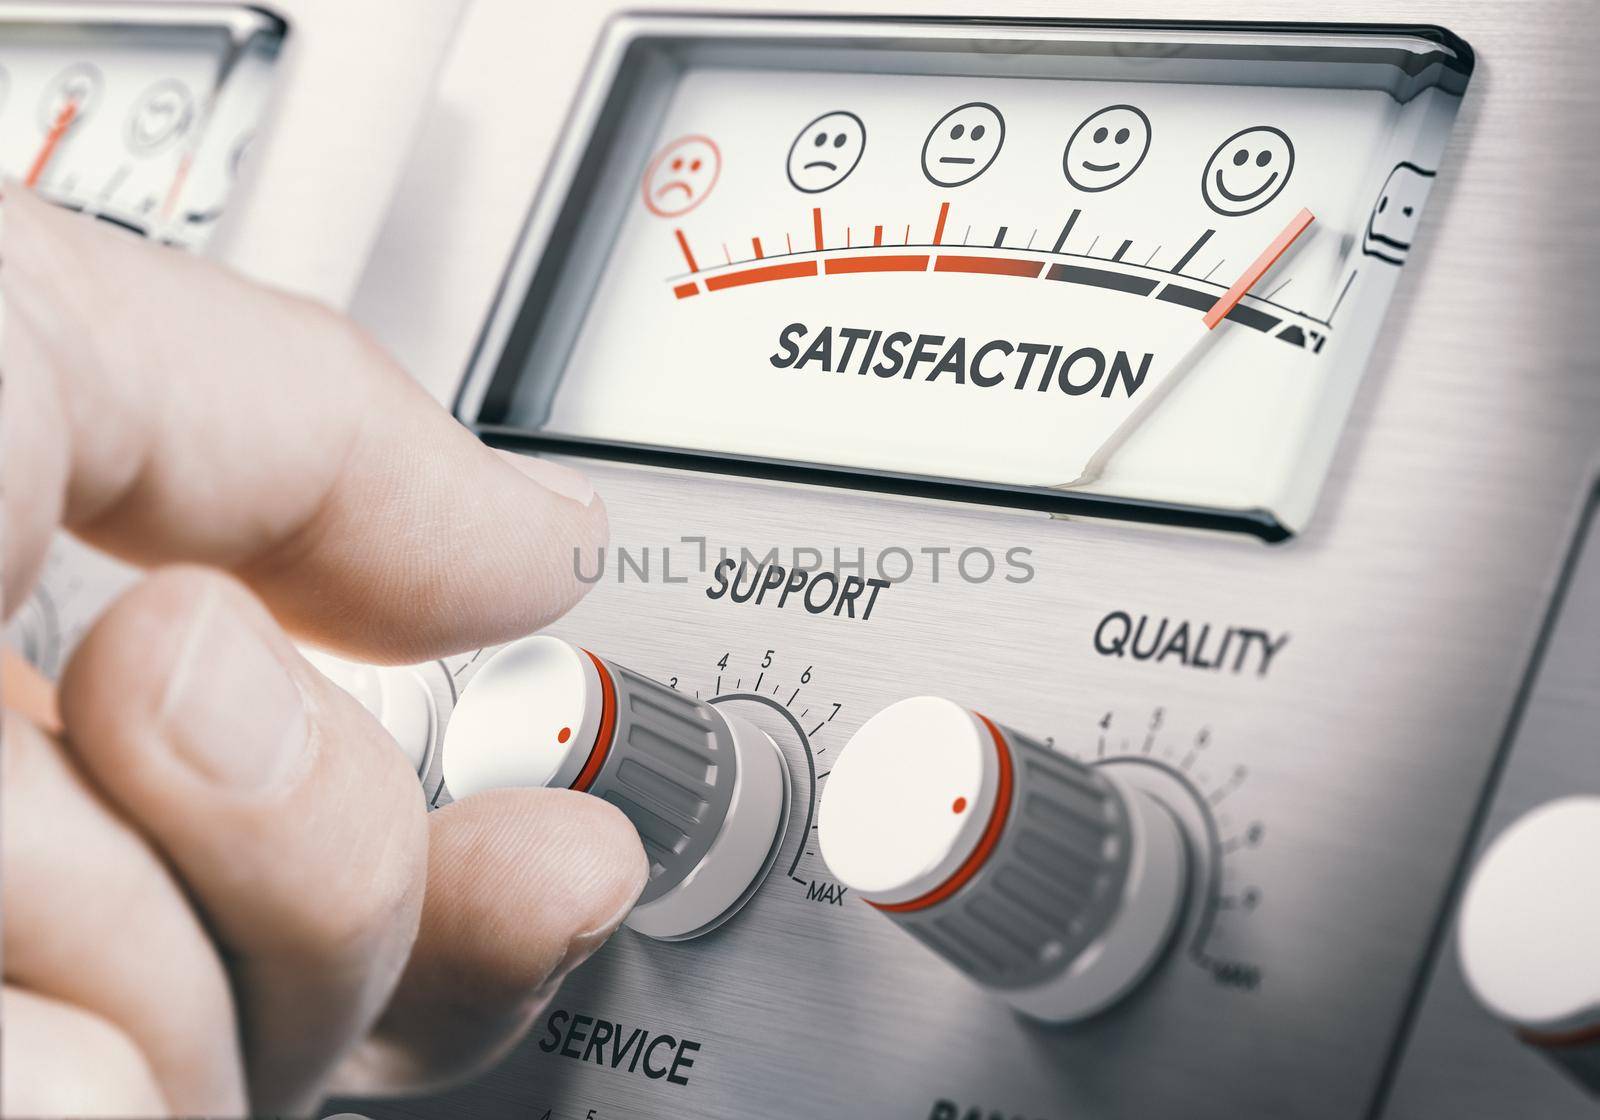 Improve support, quality and service to increase customer satisfaction. by Olivier-Le-Moal